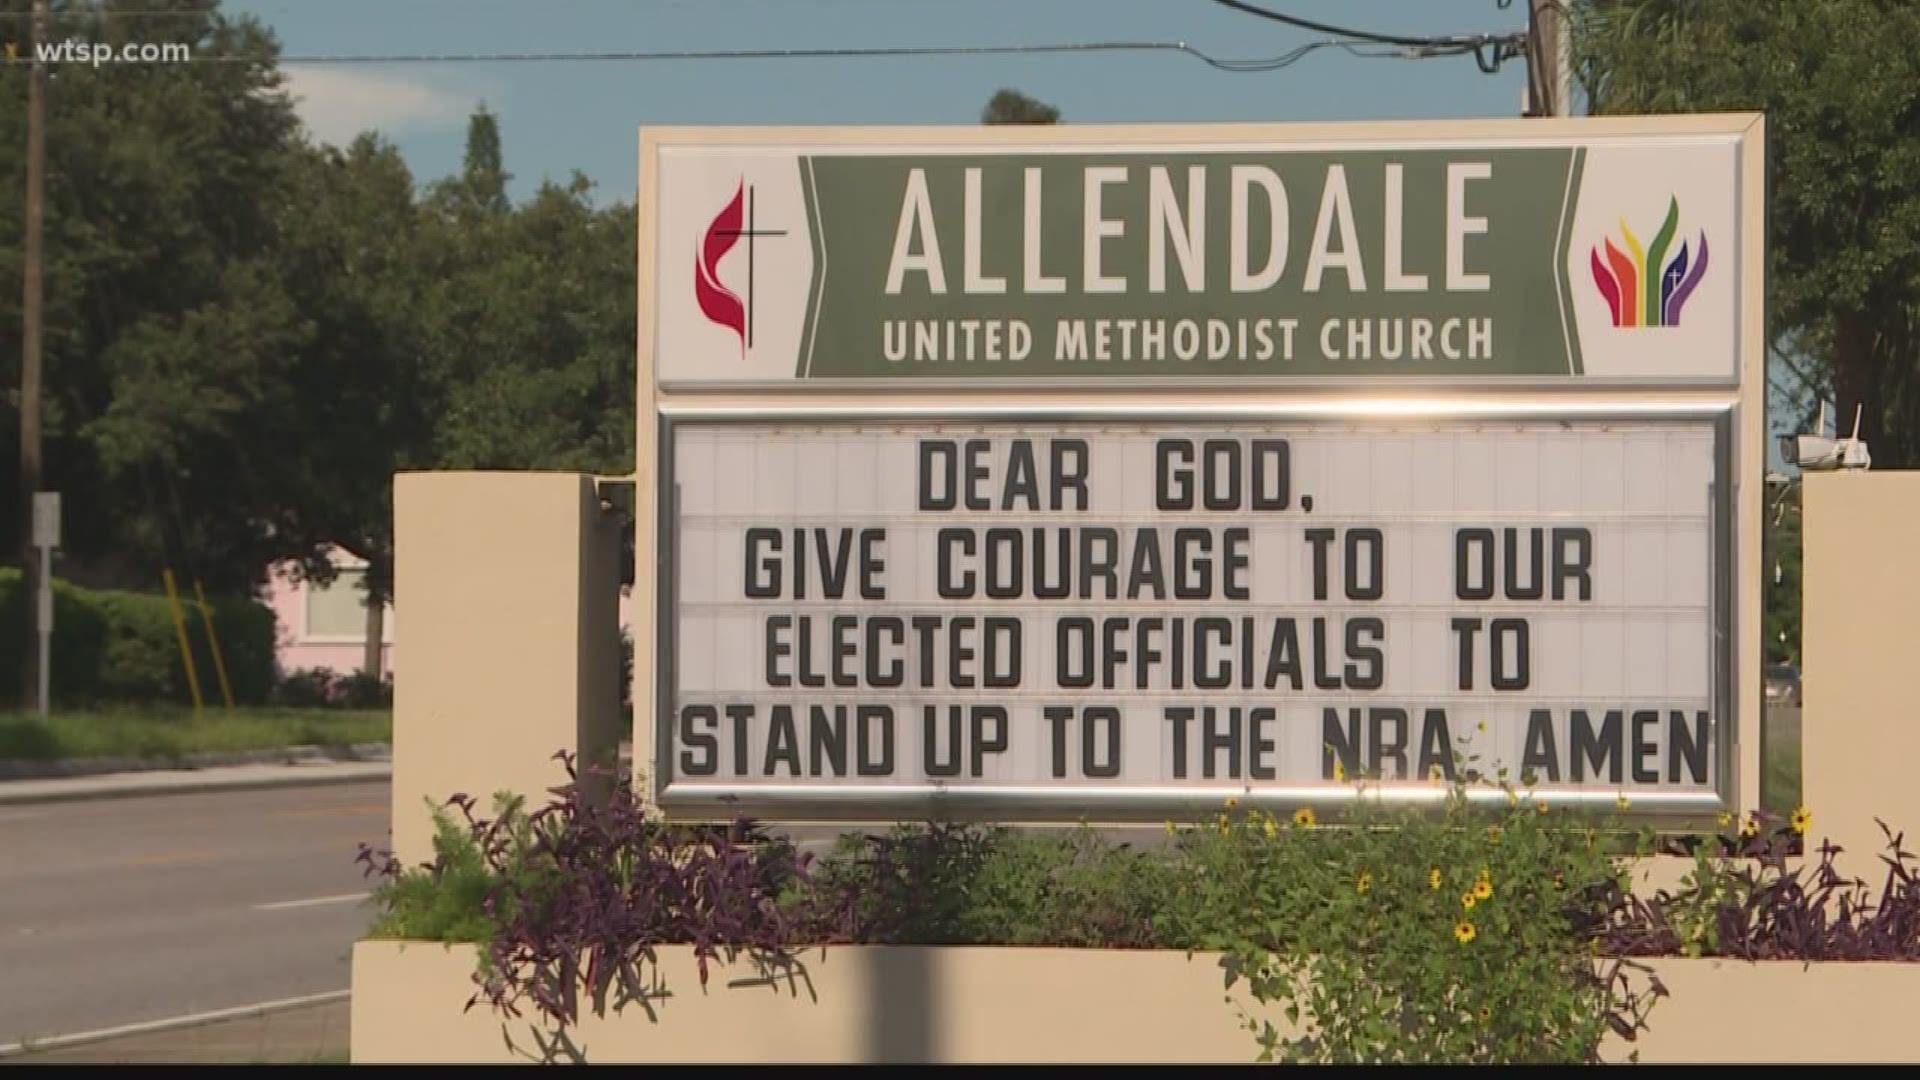 Parishioners arriving at Allendale United Methodist Church for Sunday service noticed an increased safety presence. The church has been on alert since someone shot through one of their preschool windows on Thursday. 

It was the first time the Edwards family had been back to the campus since the incident. Makena Edwards, 4, told her parents she didn't want to attend Sunday school.